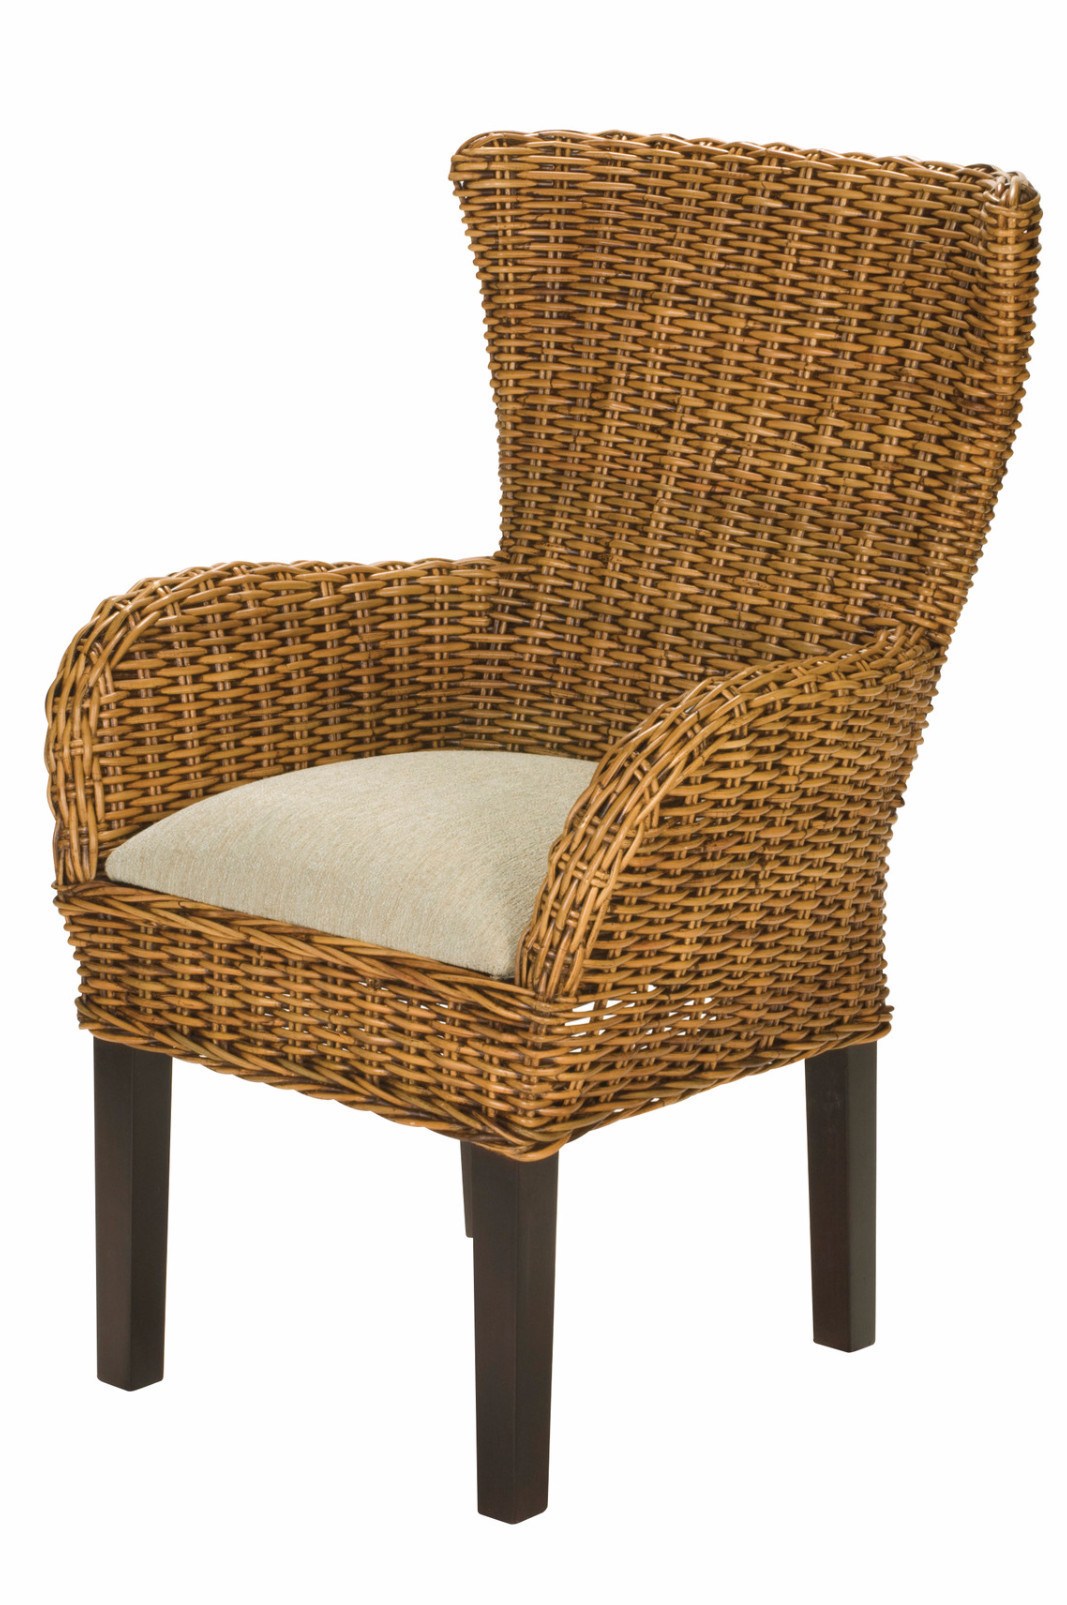 Designer Wicker & Rattan By Tribor Clarissa Porch Dining Arm Chair Chair - Rattan Imports